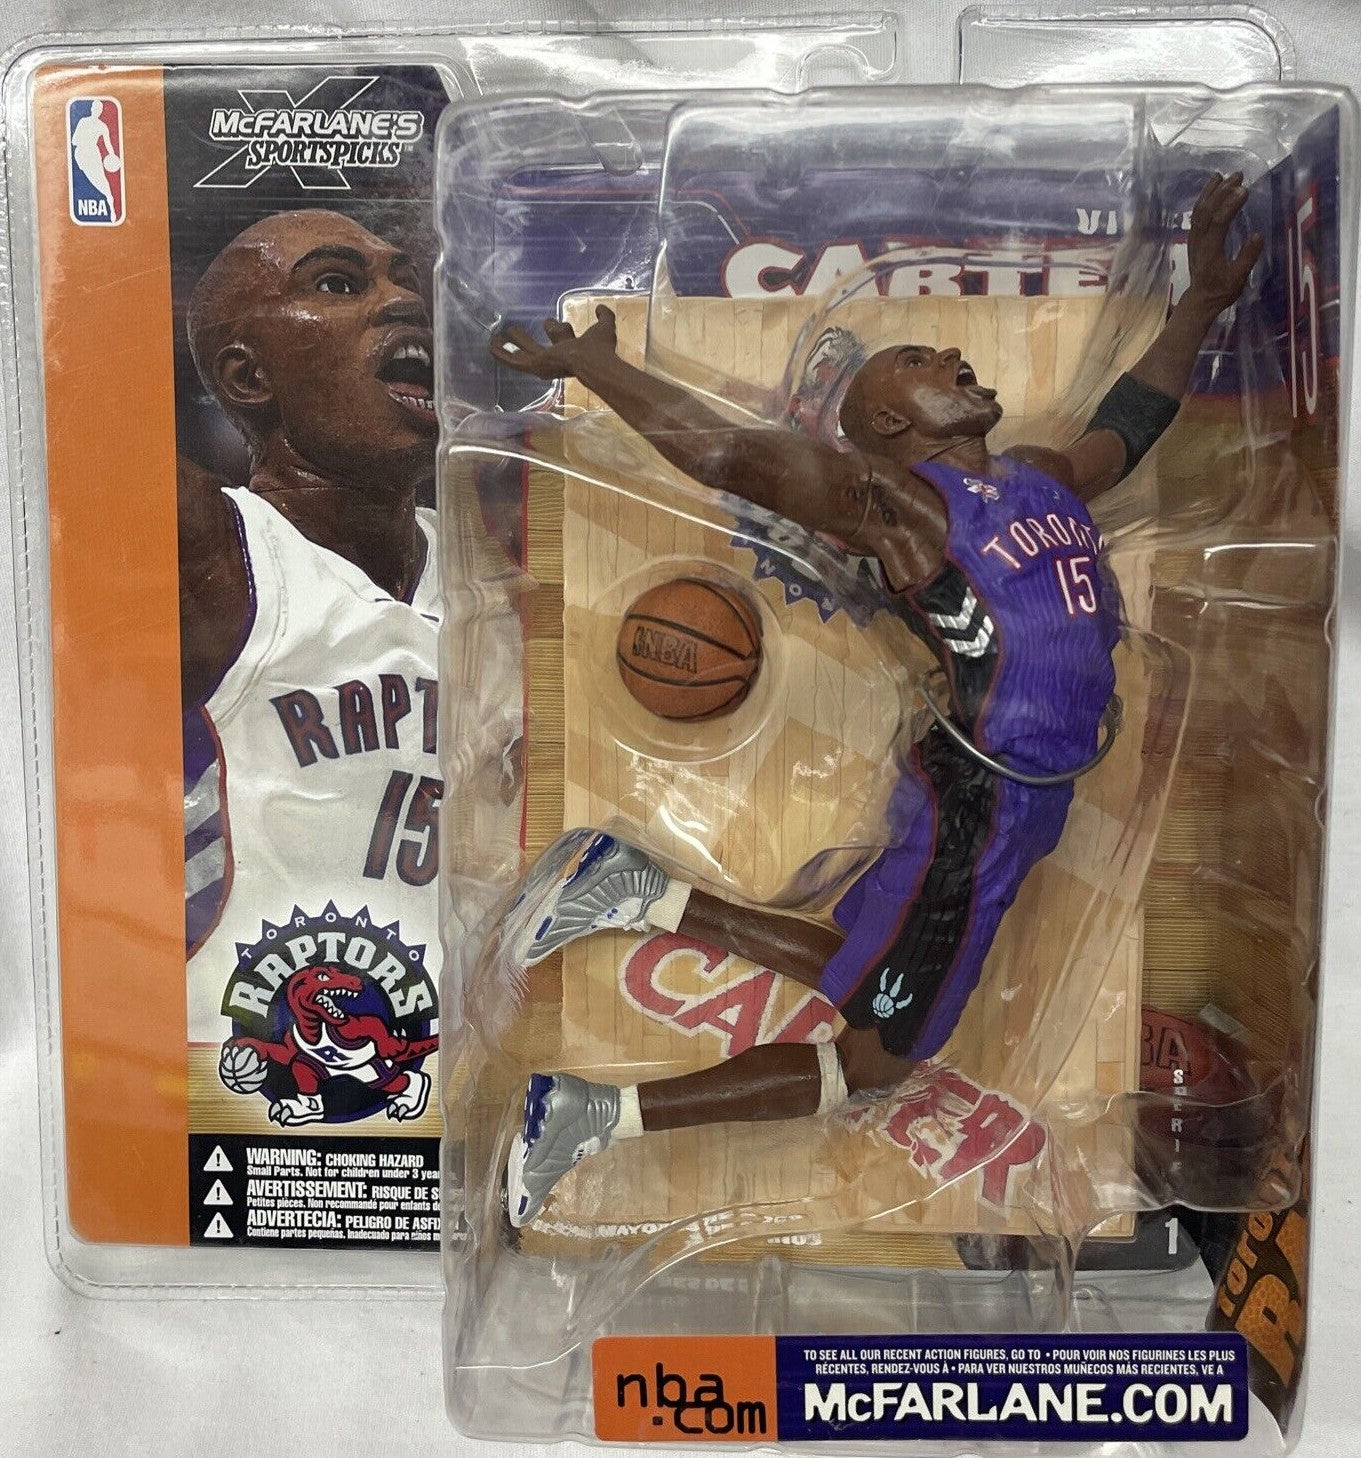 NBA series 1 VINCE CARTER chase action figure